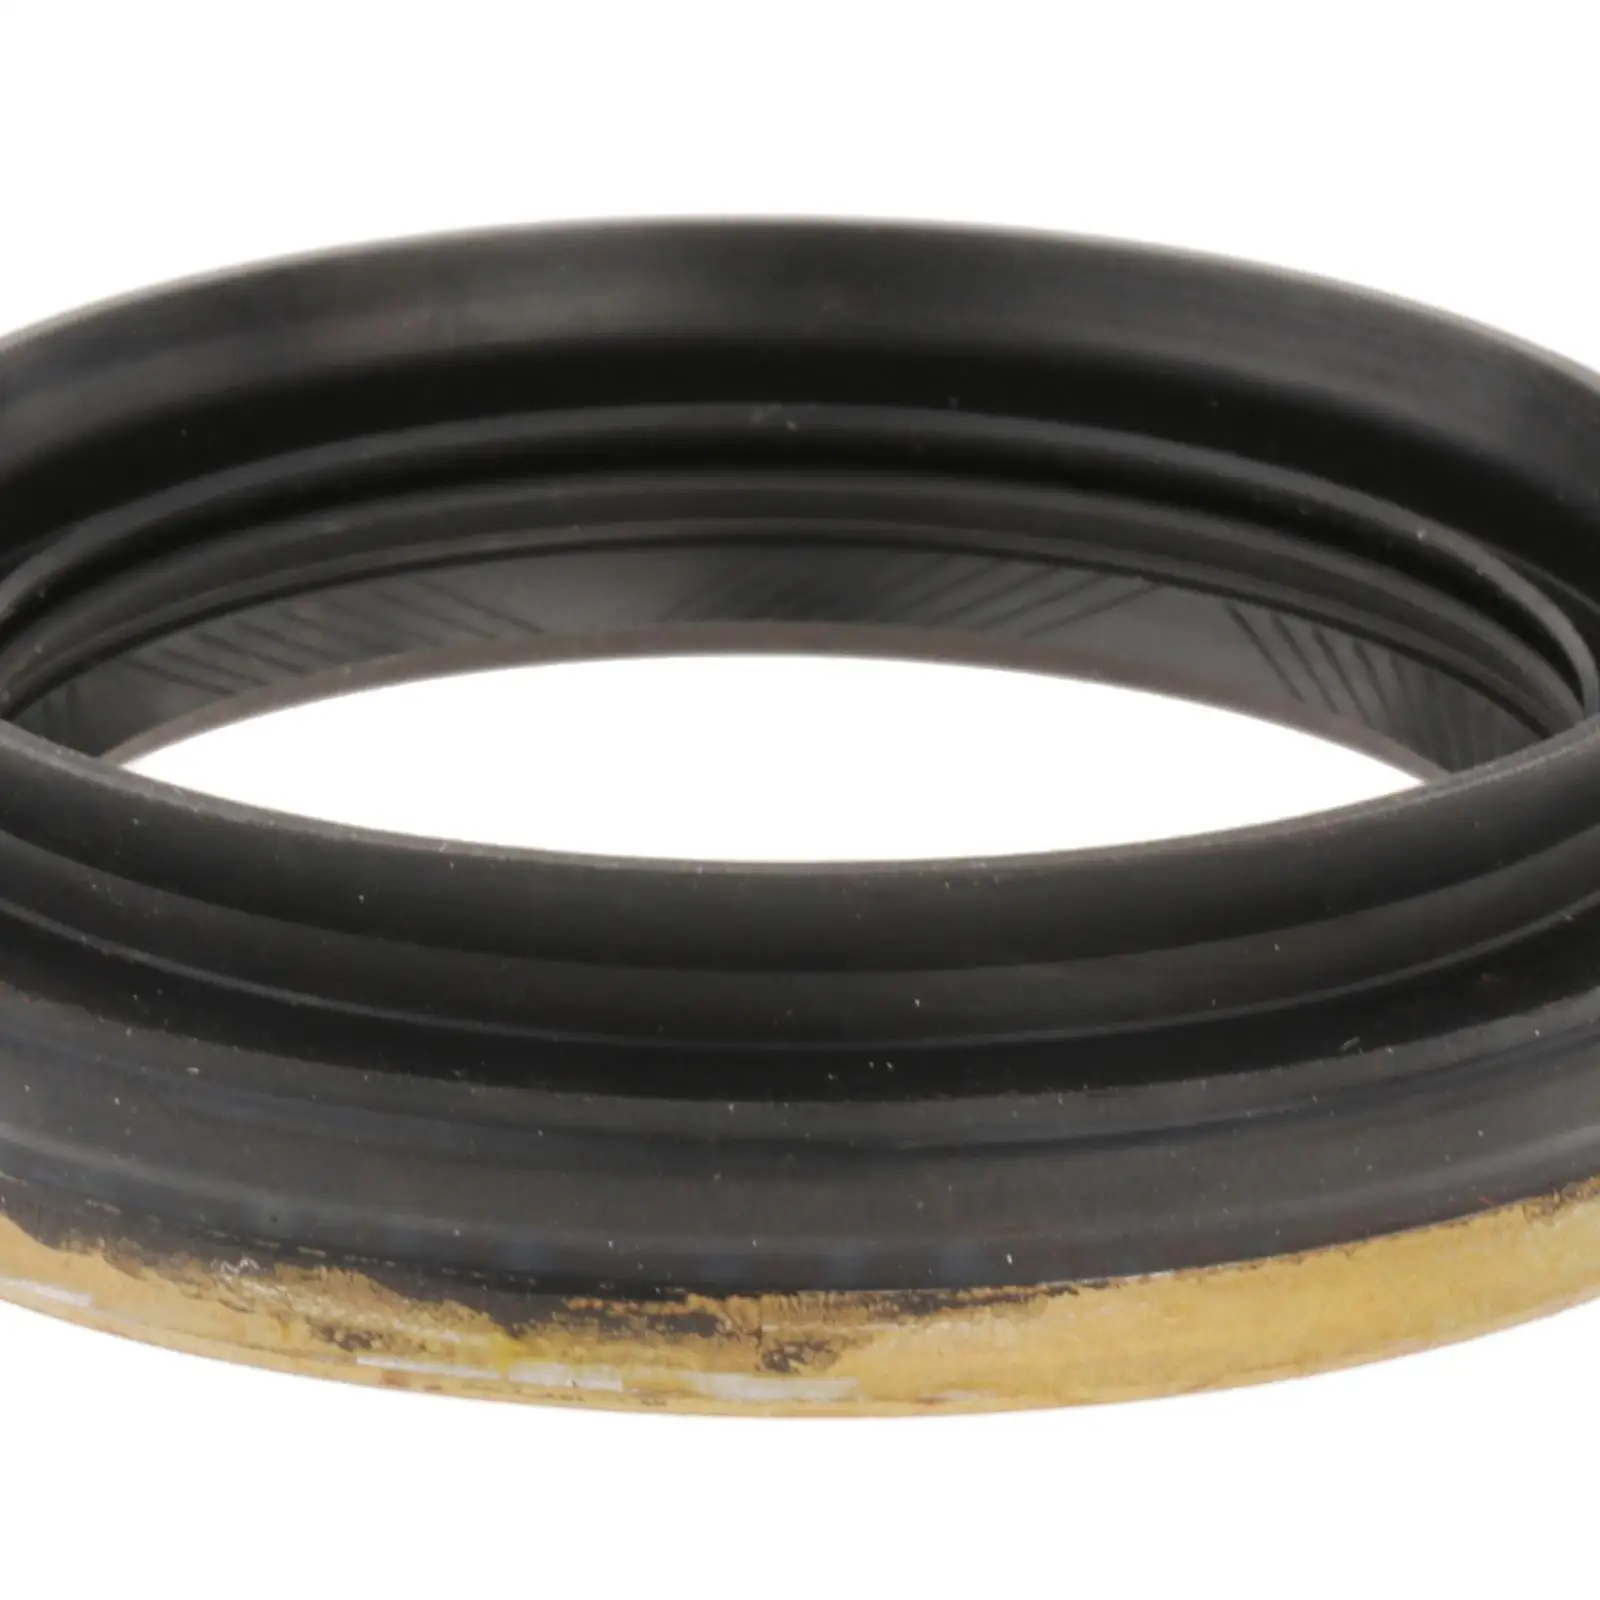 Half Shaft Oil Seal Jf015E Part High Quality Replacement Fits for 